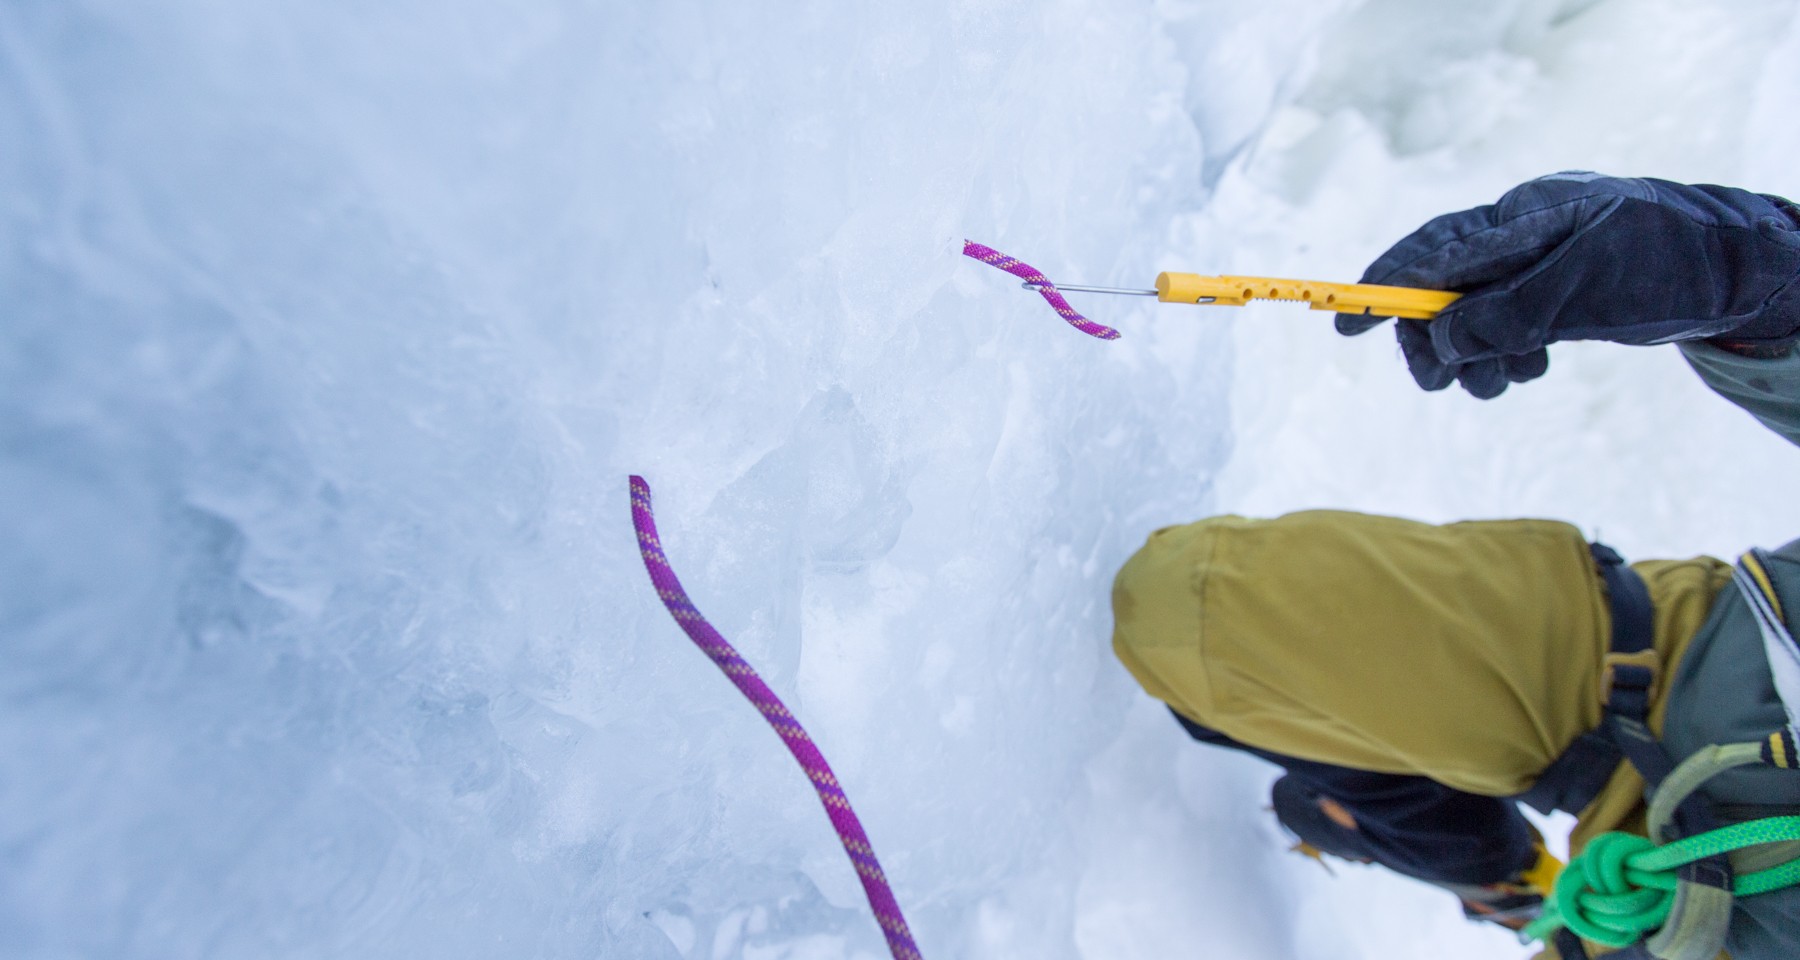 Ice climbing course for advanced Climbers